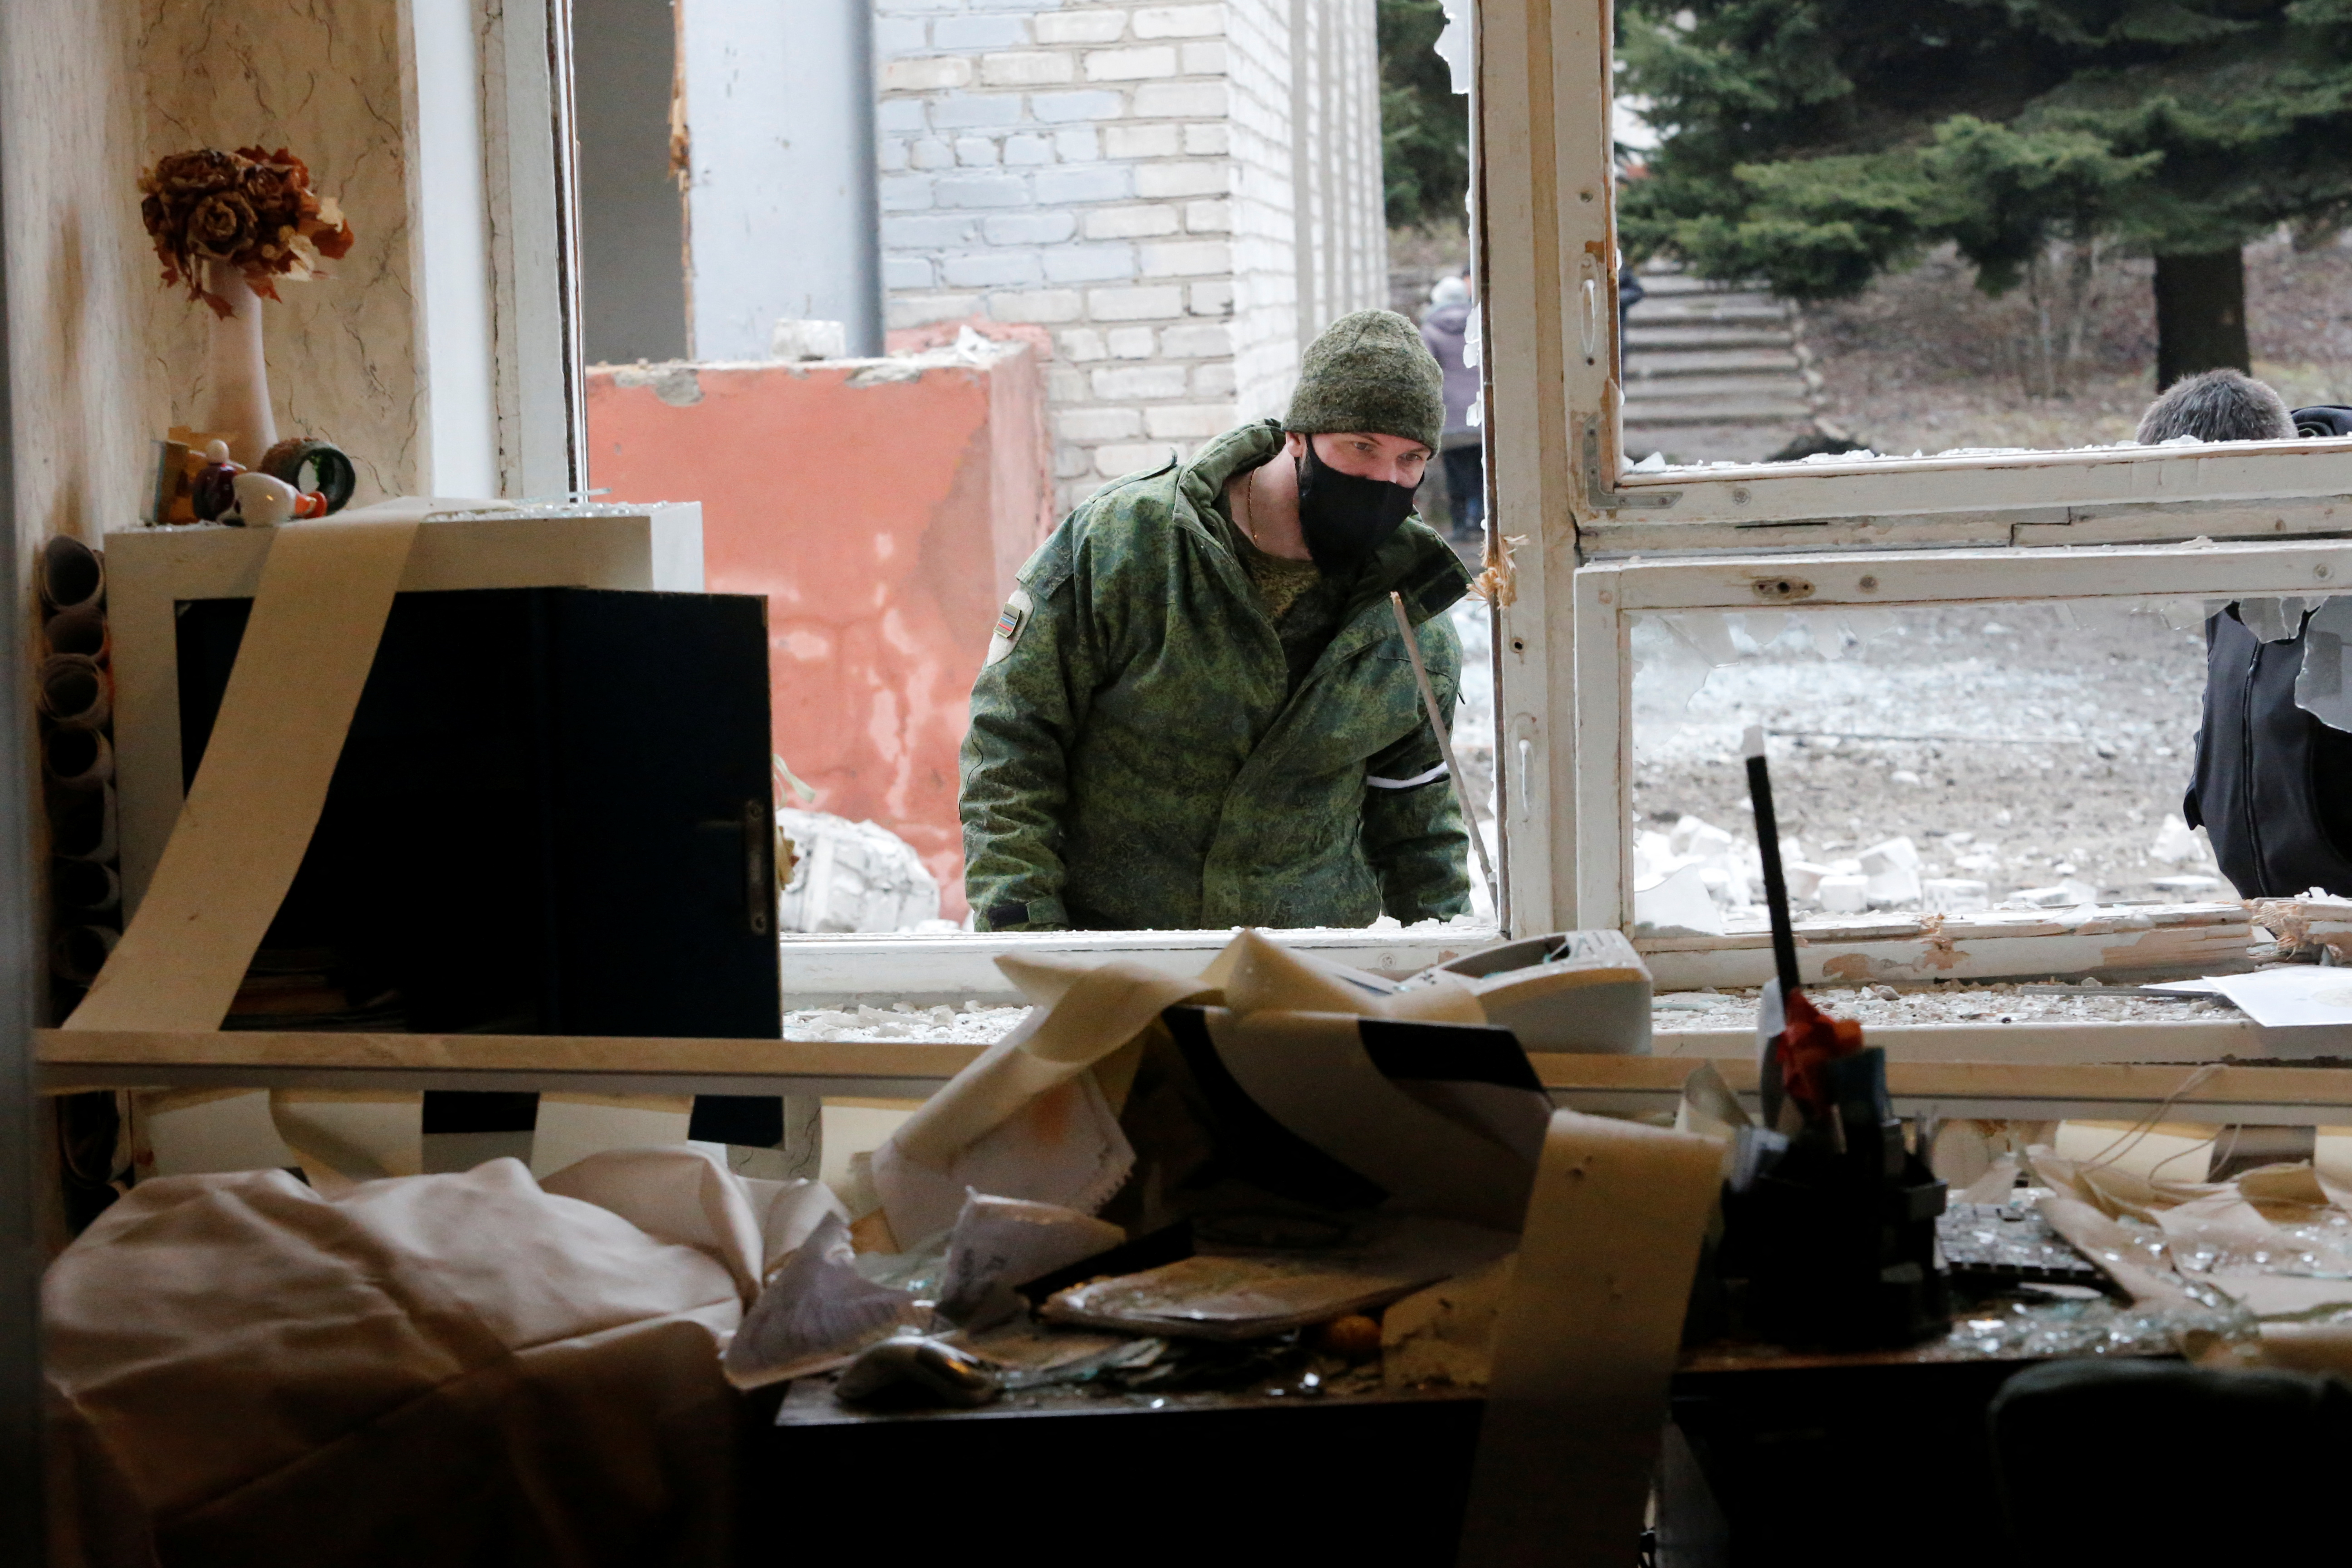 A view shows a damaged school building in the Donetsk region